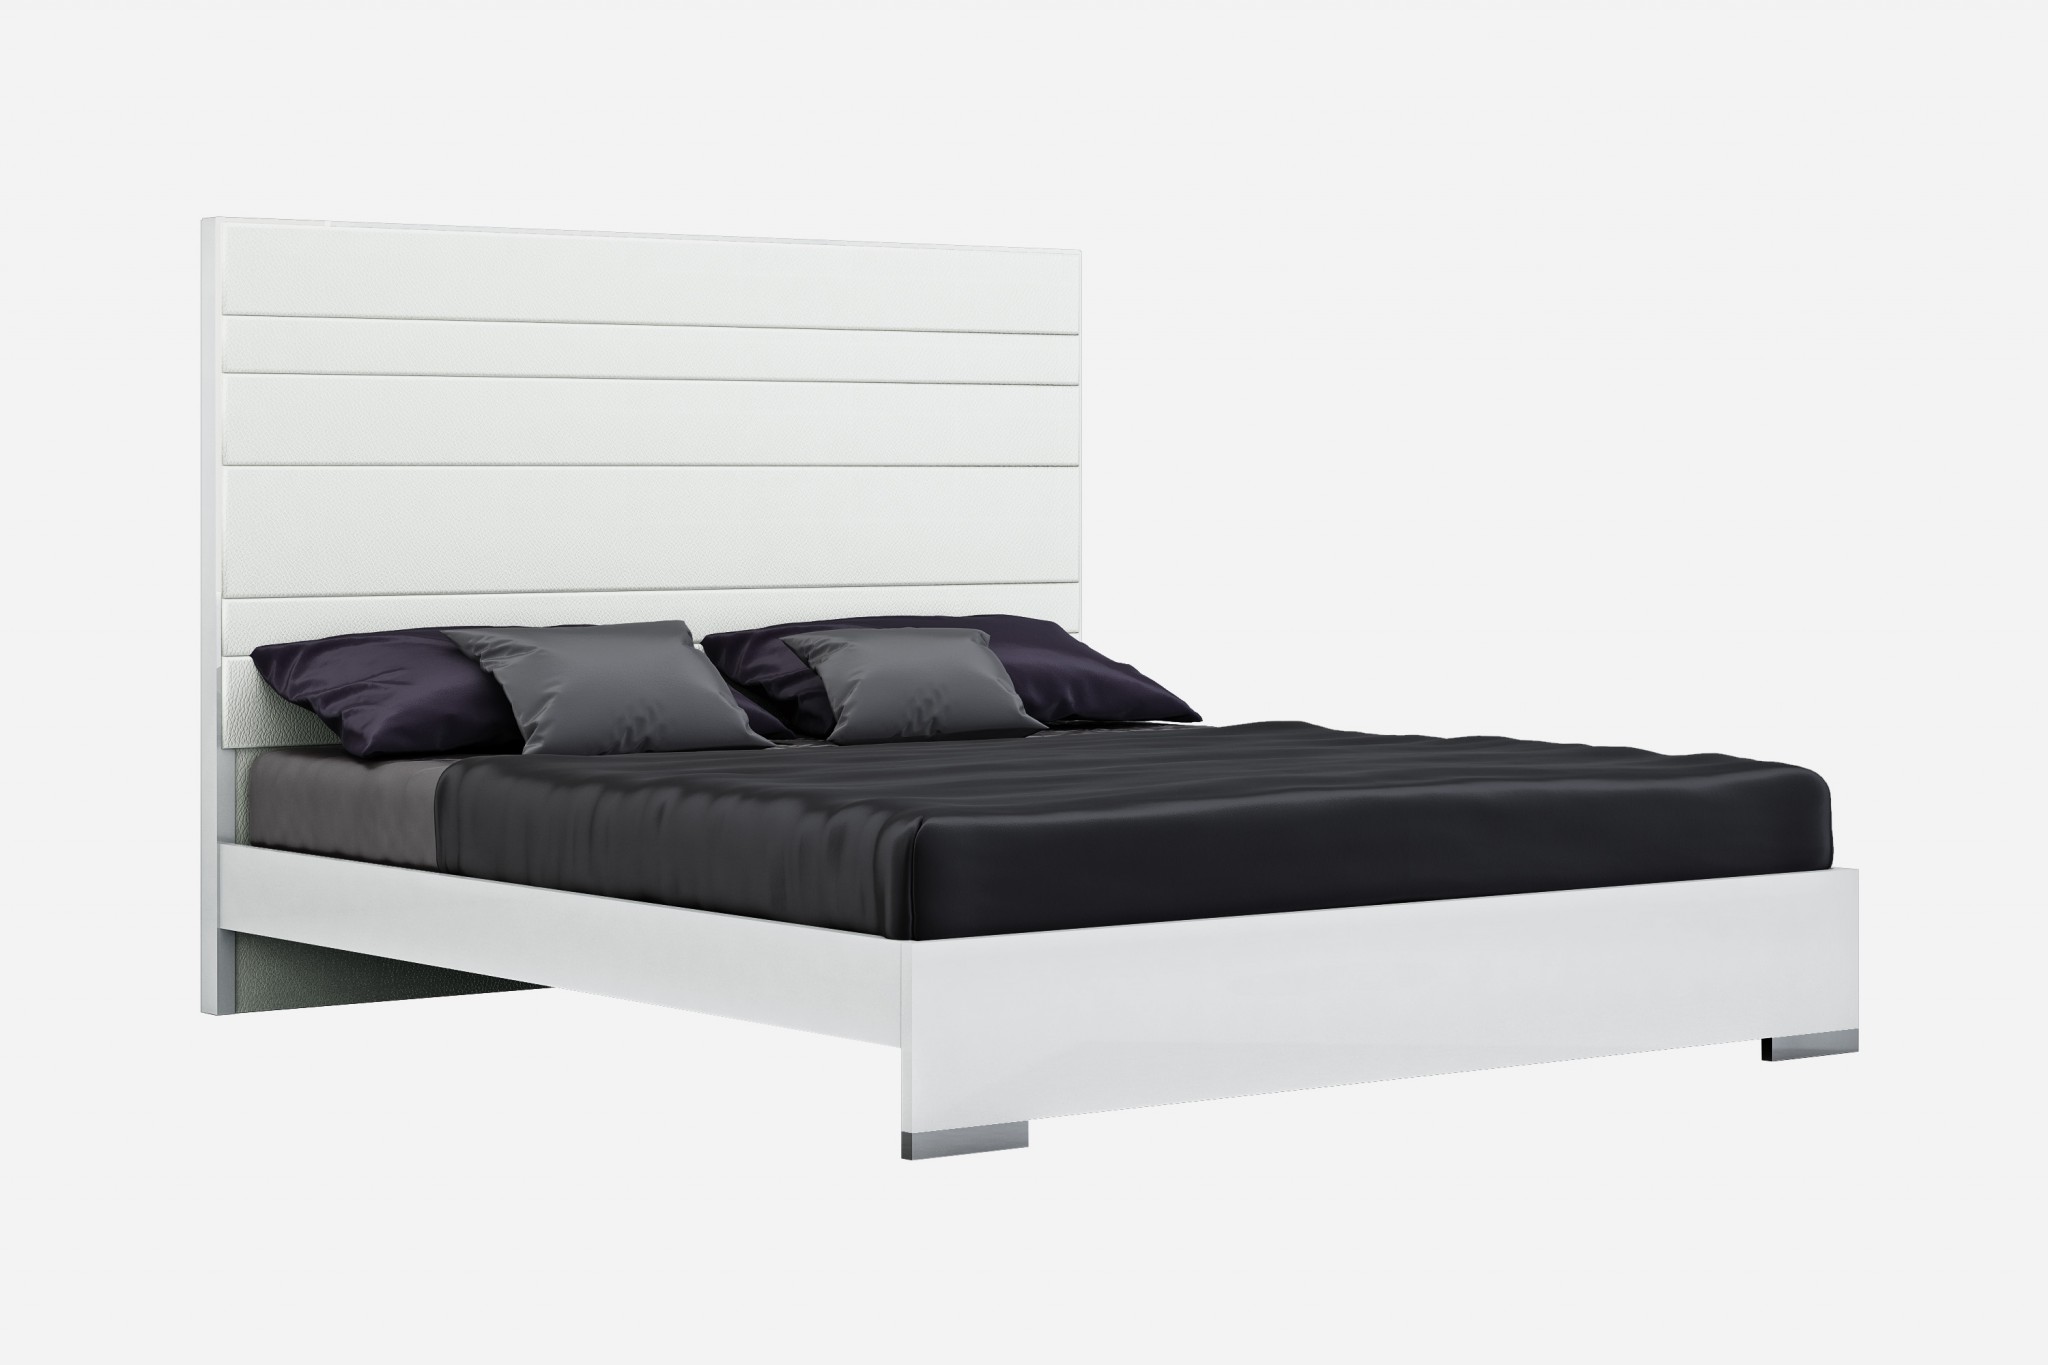 60" X 80" X 54" White Stainless Steel Queen Bed